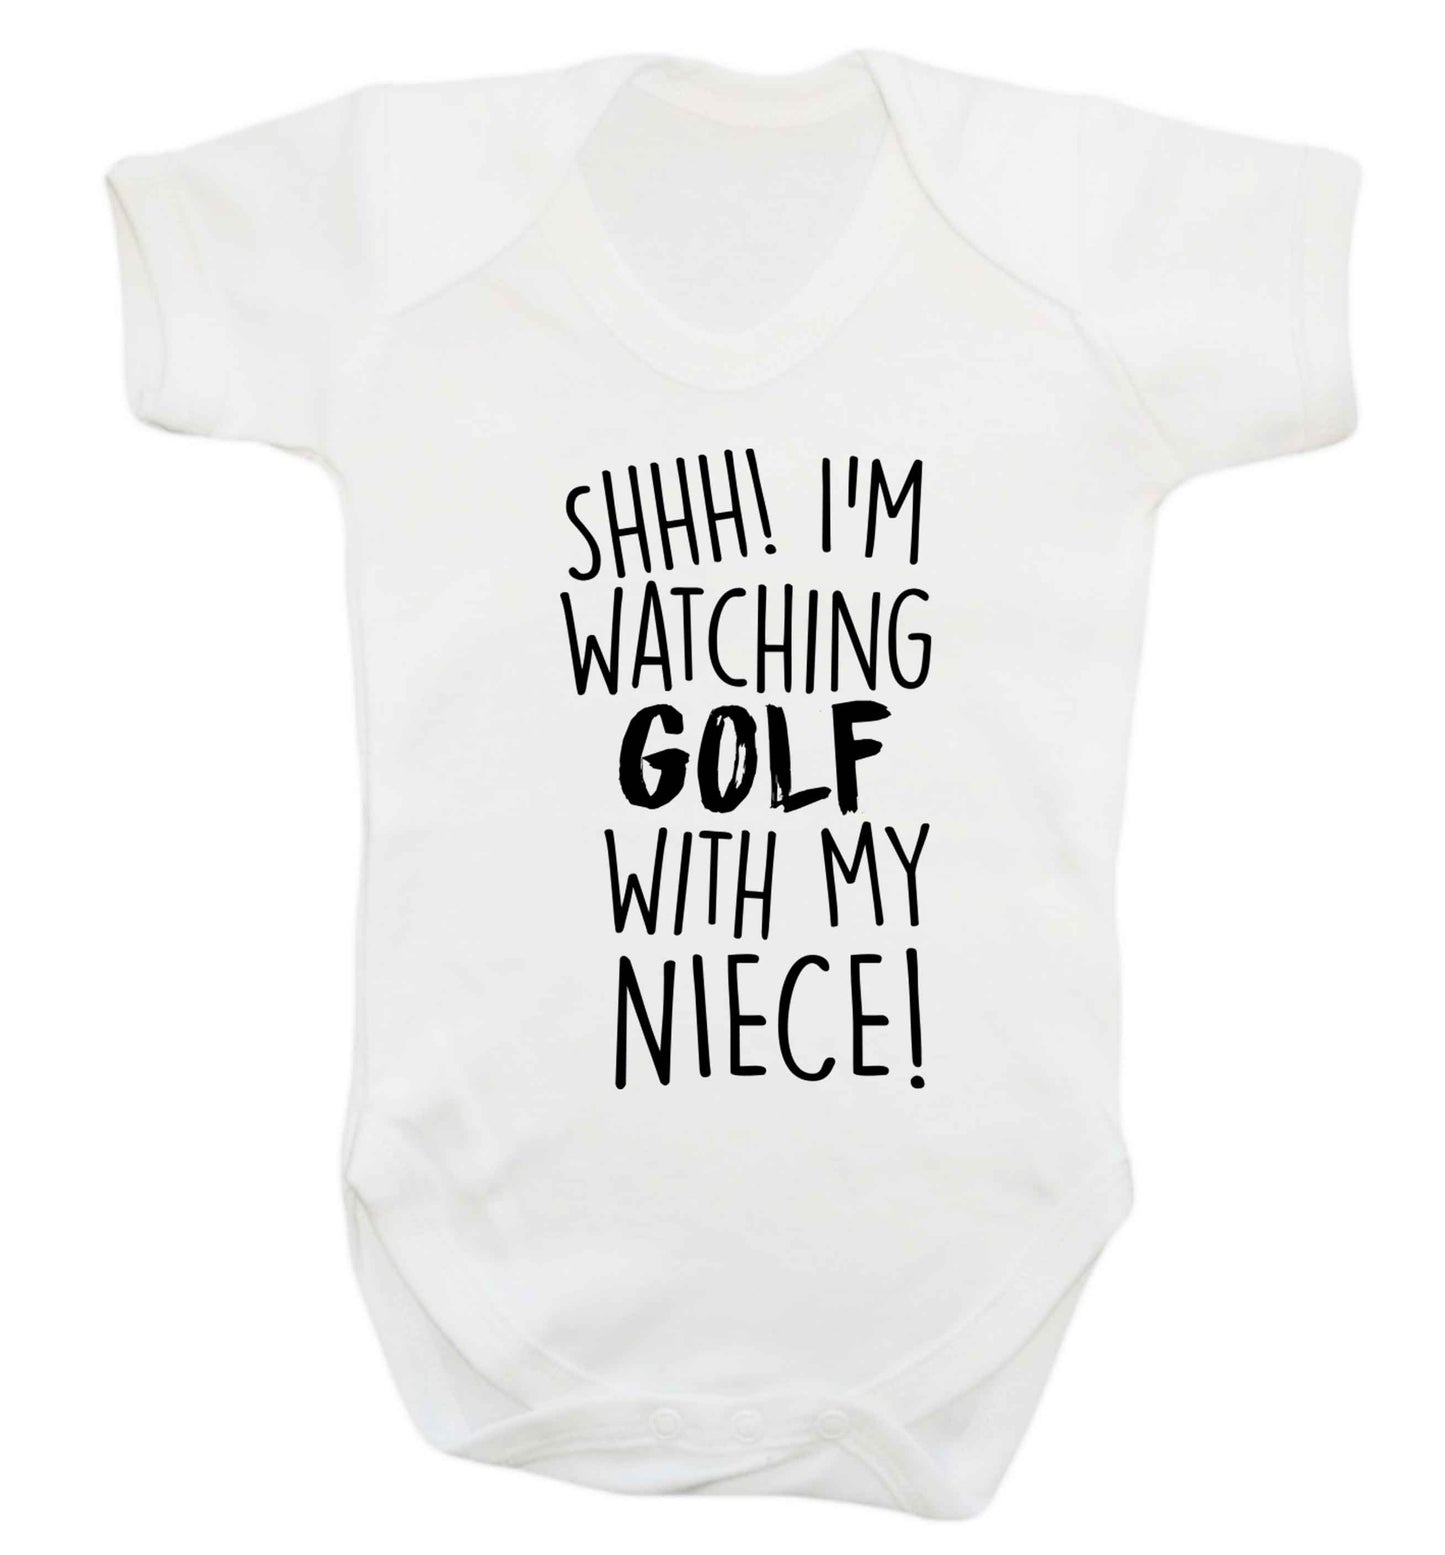 Shh I'm watching golf with my niece Baby Vest white 18-24 months